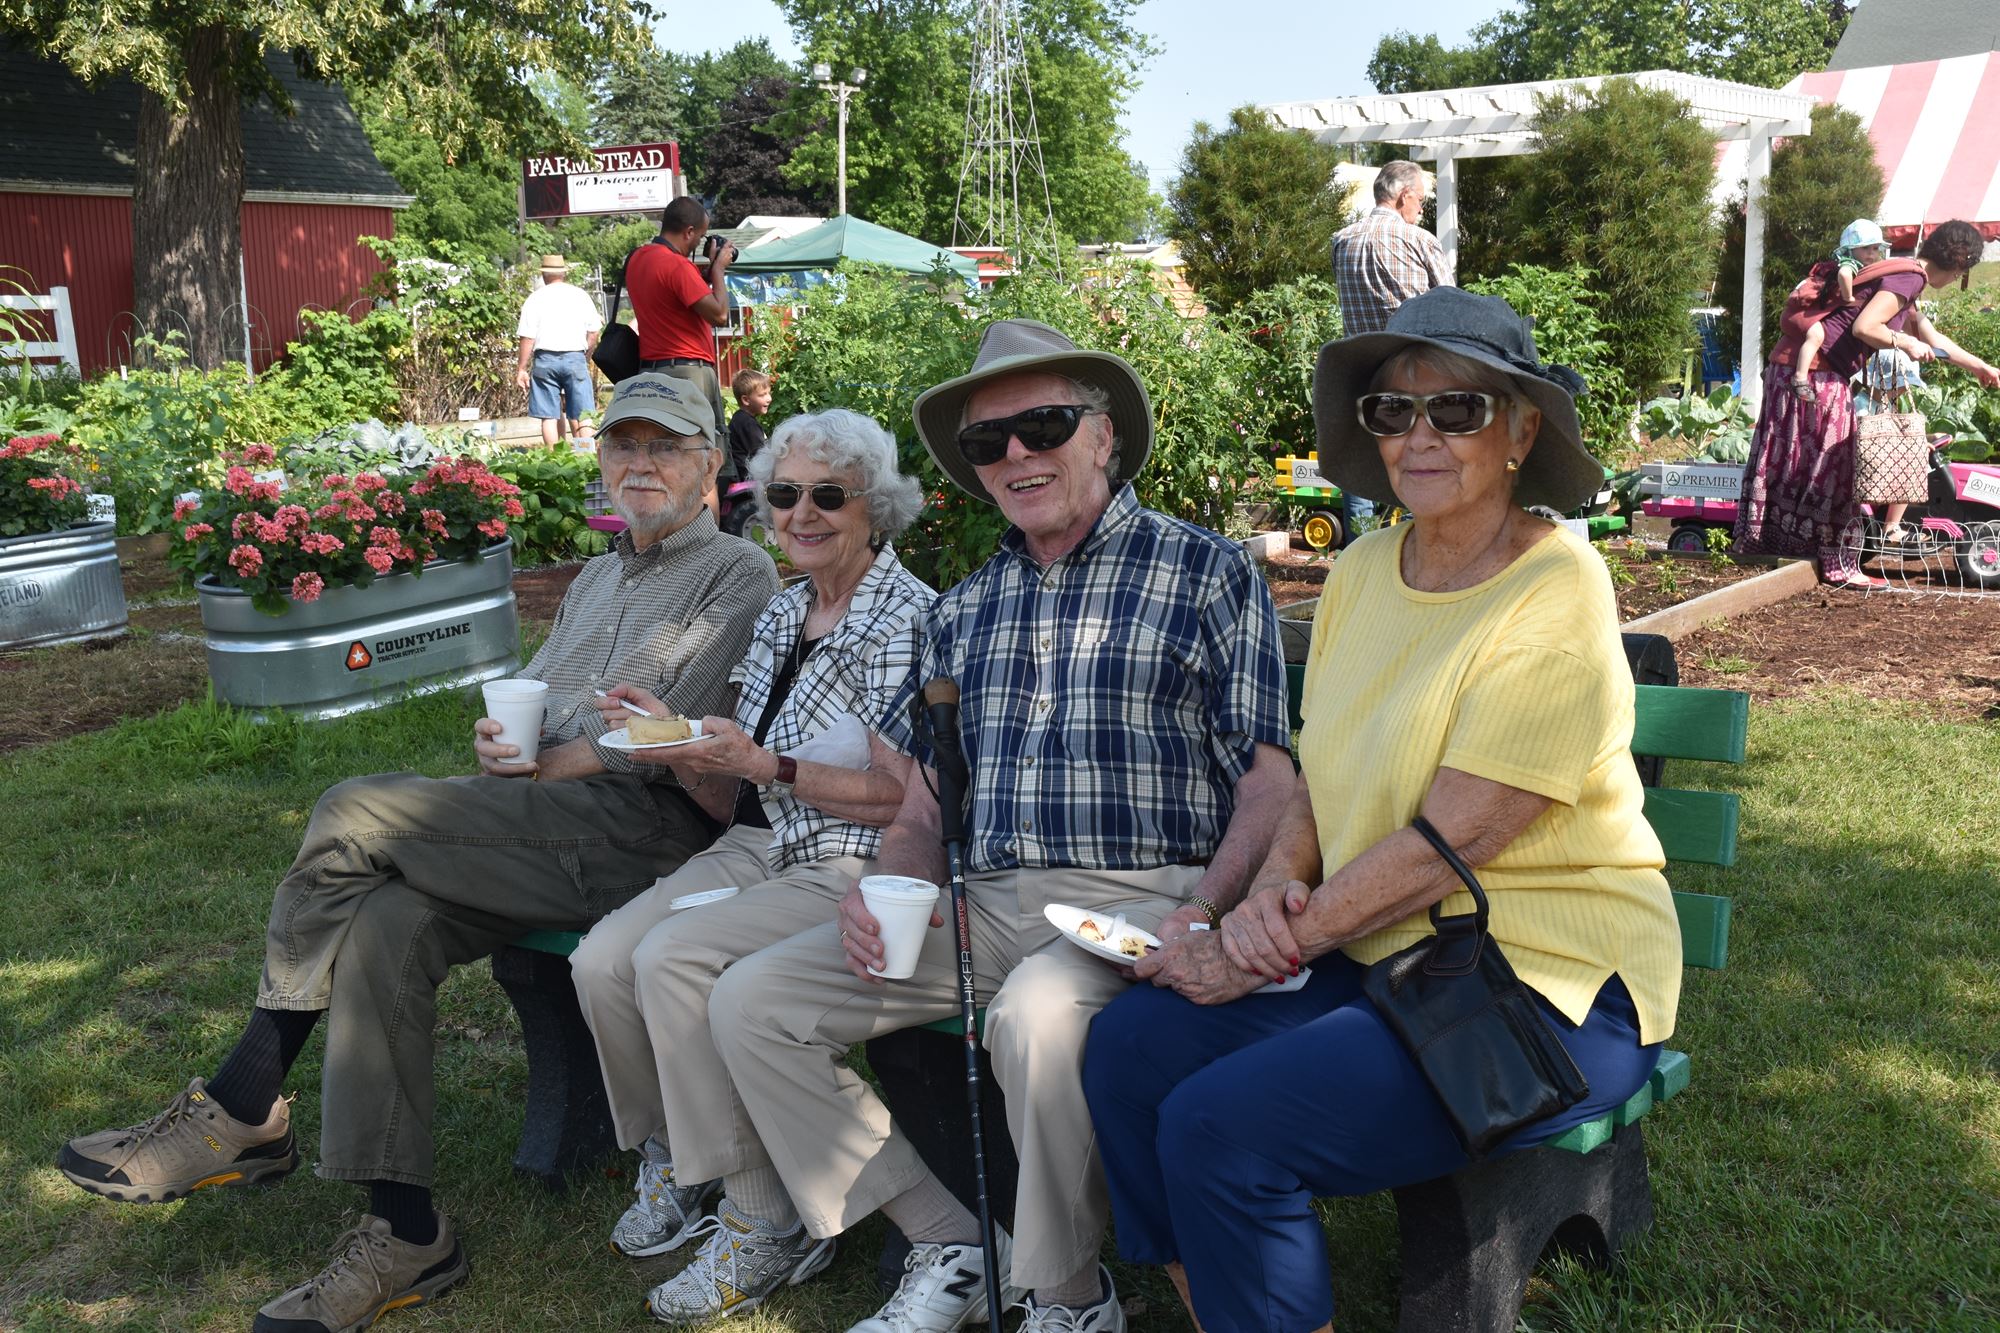 Senior Citizens Day - Tuesday, July 25